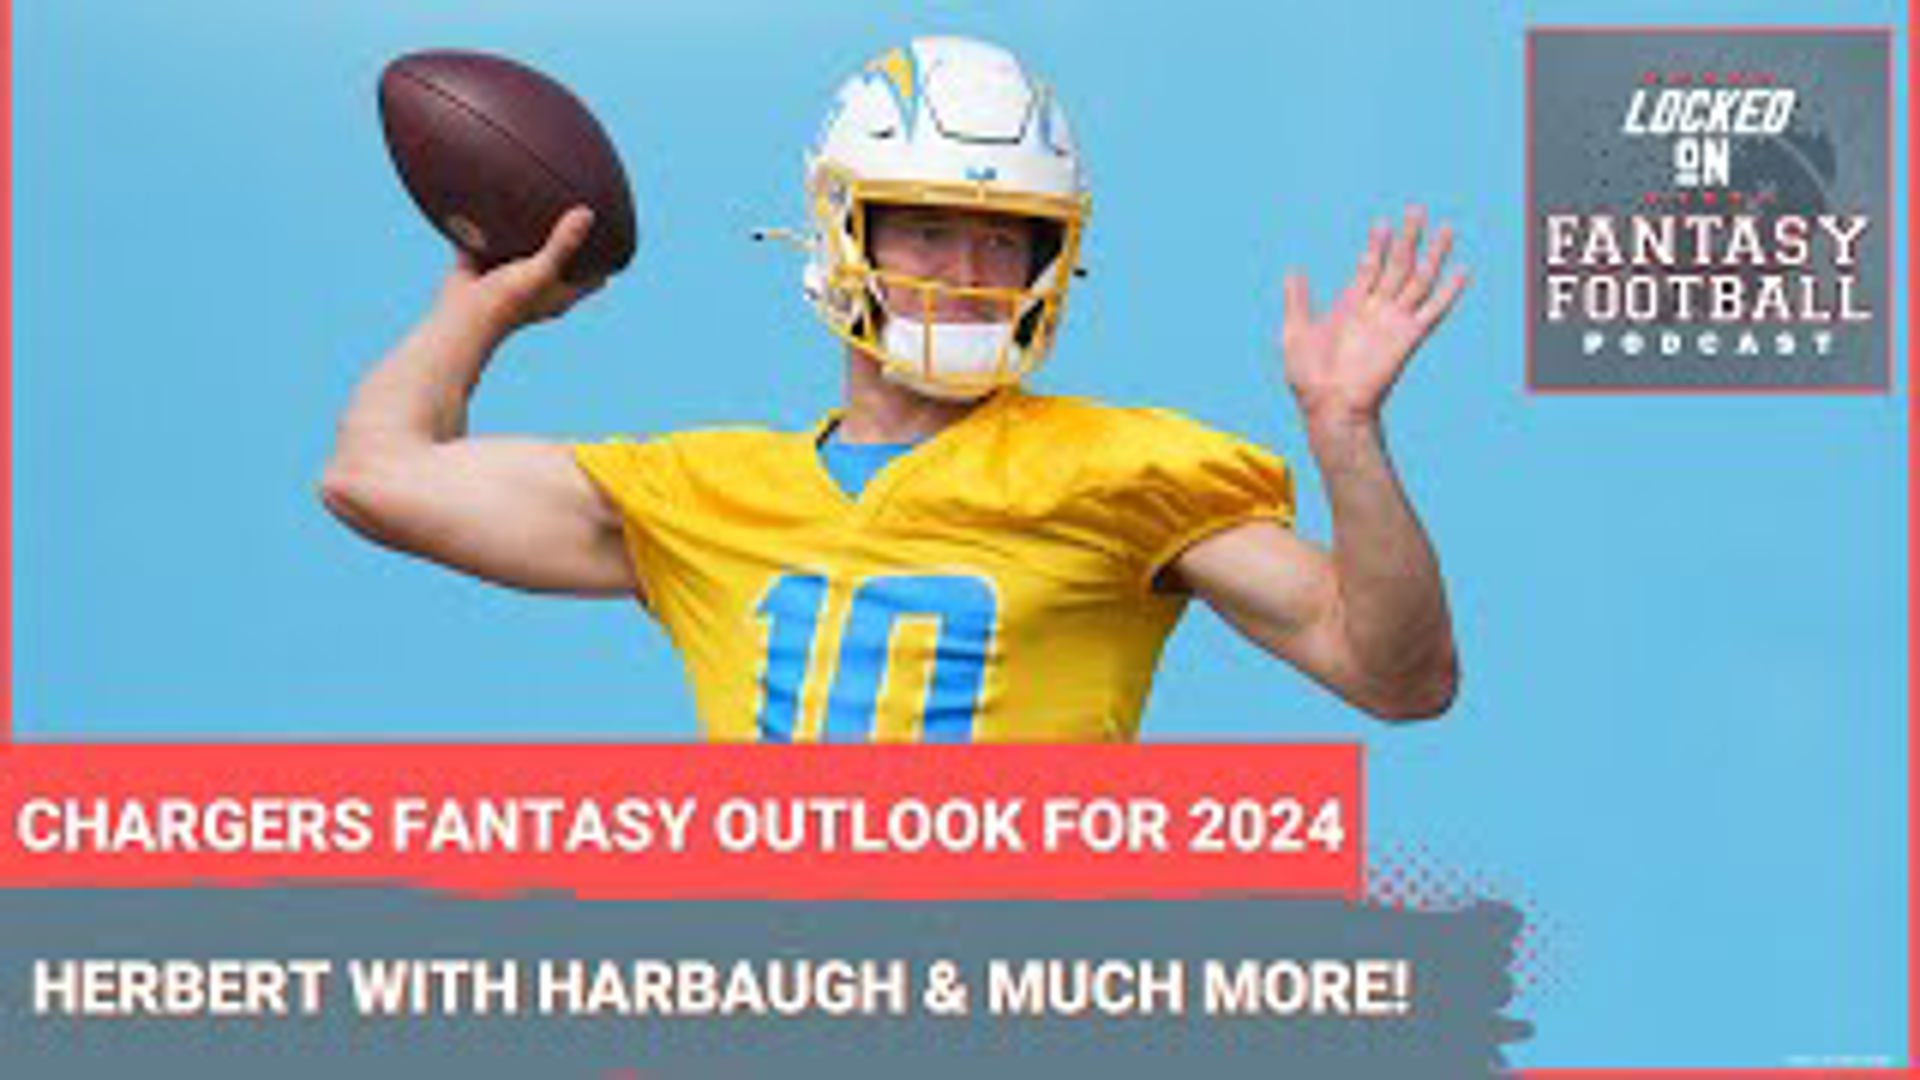 Sporting News.com's Vinnie Iyer and NFL.com's Michelle Magdziuk break down the fantasy football potential of the 2024 Los Angeles Chargers.